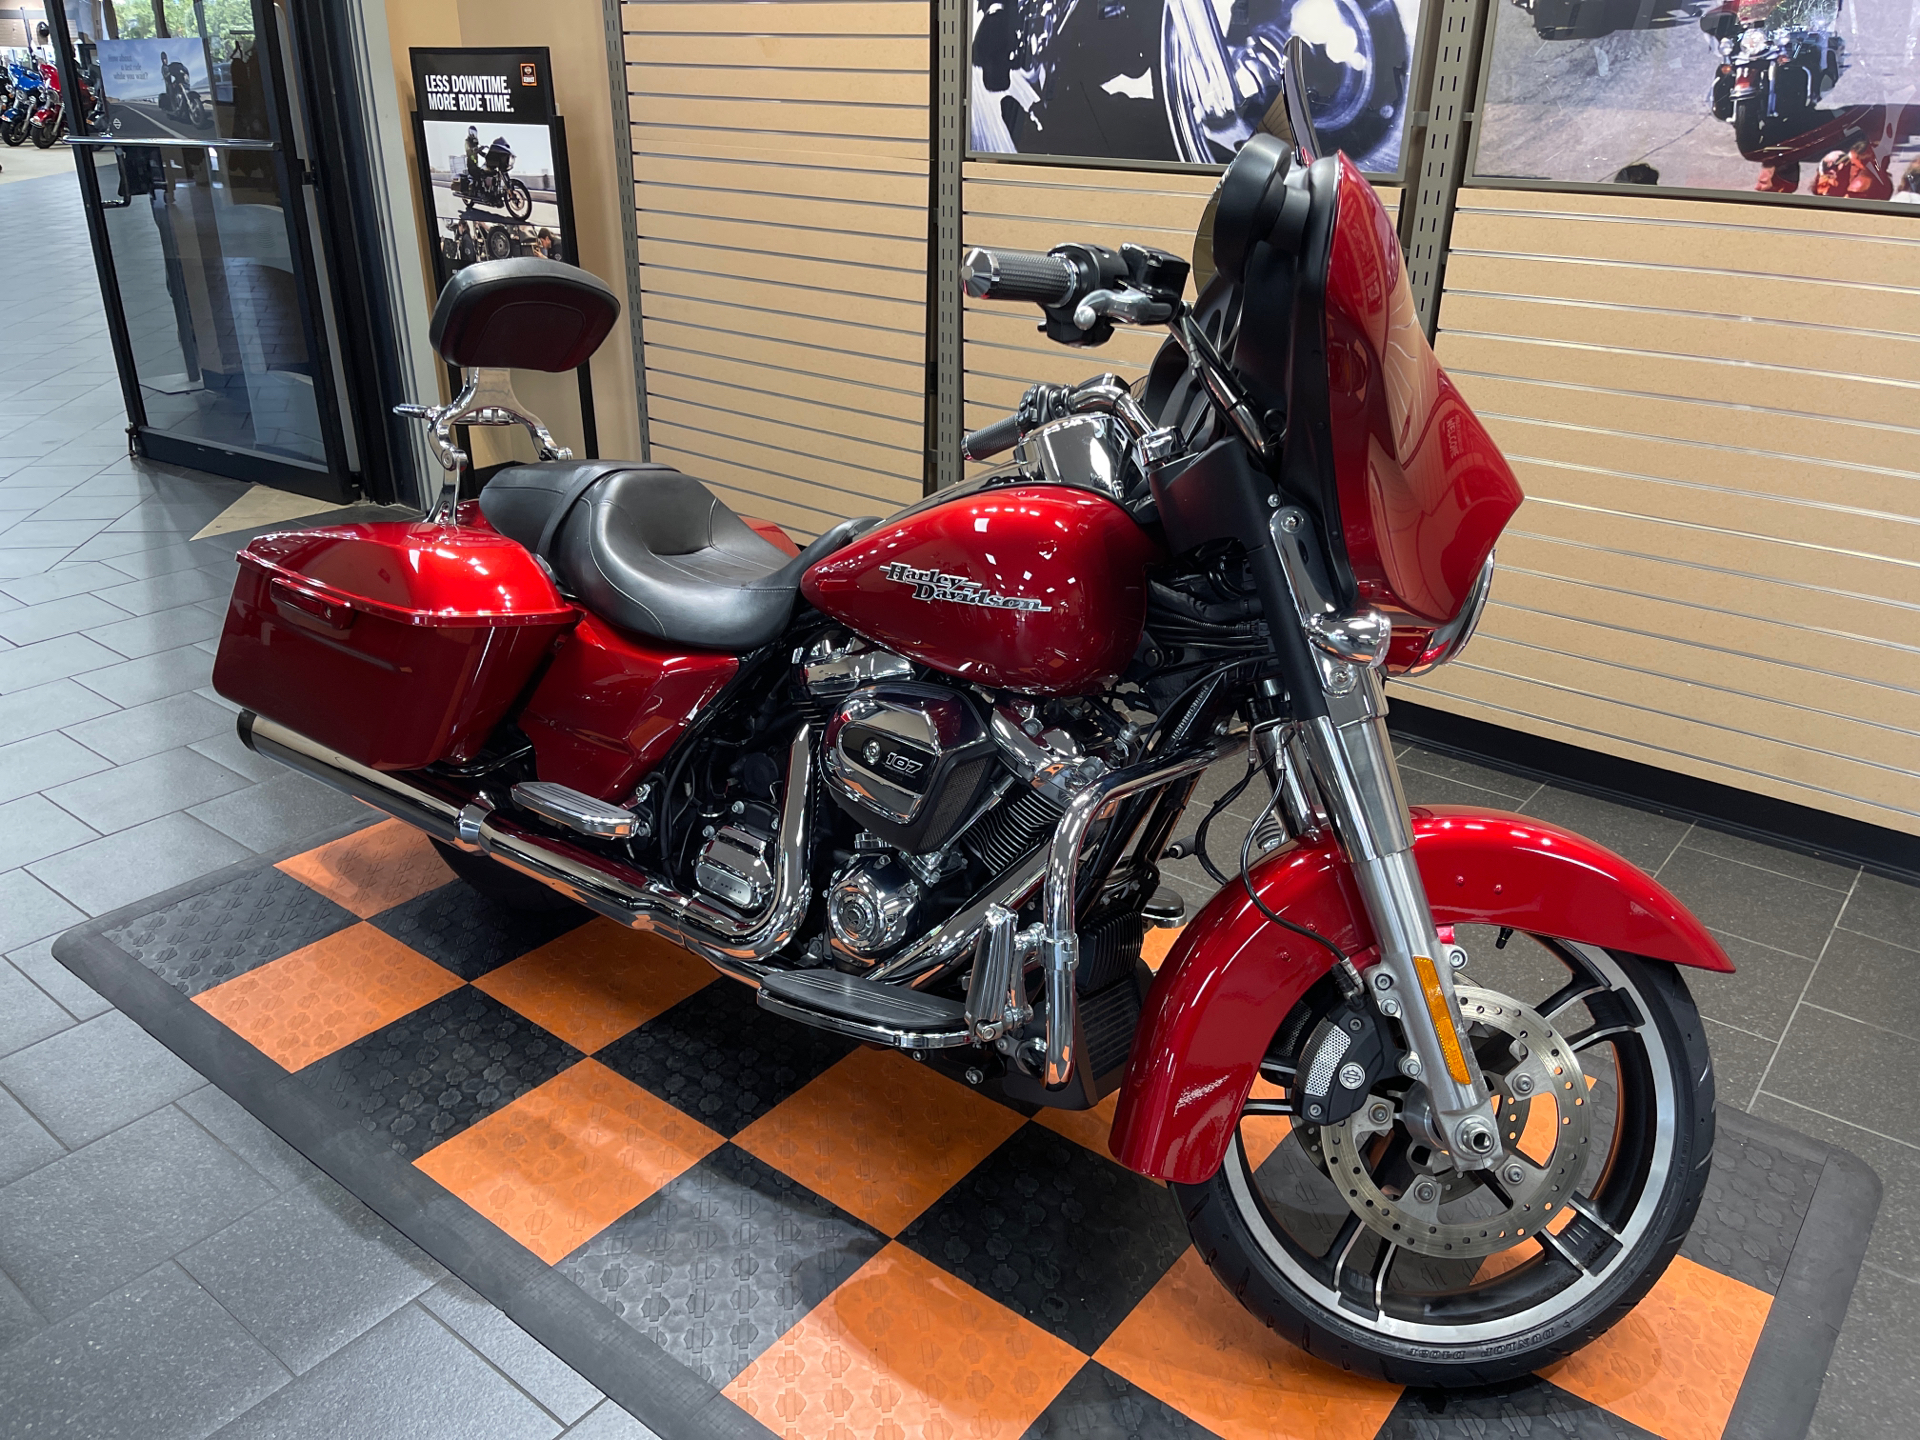 2019 Harley-Davidson Street Glide® in The Woodlands, Texas - Photo 2